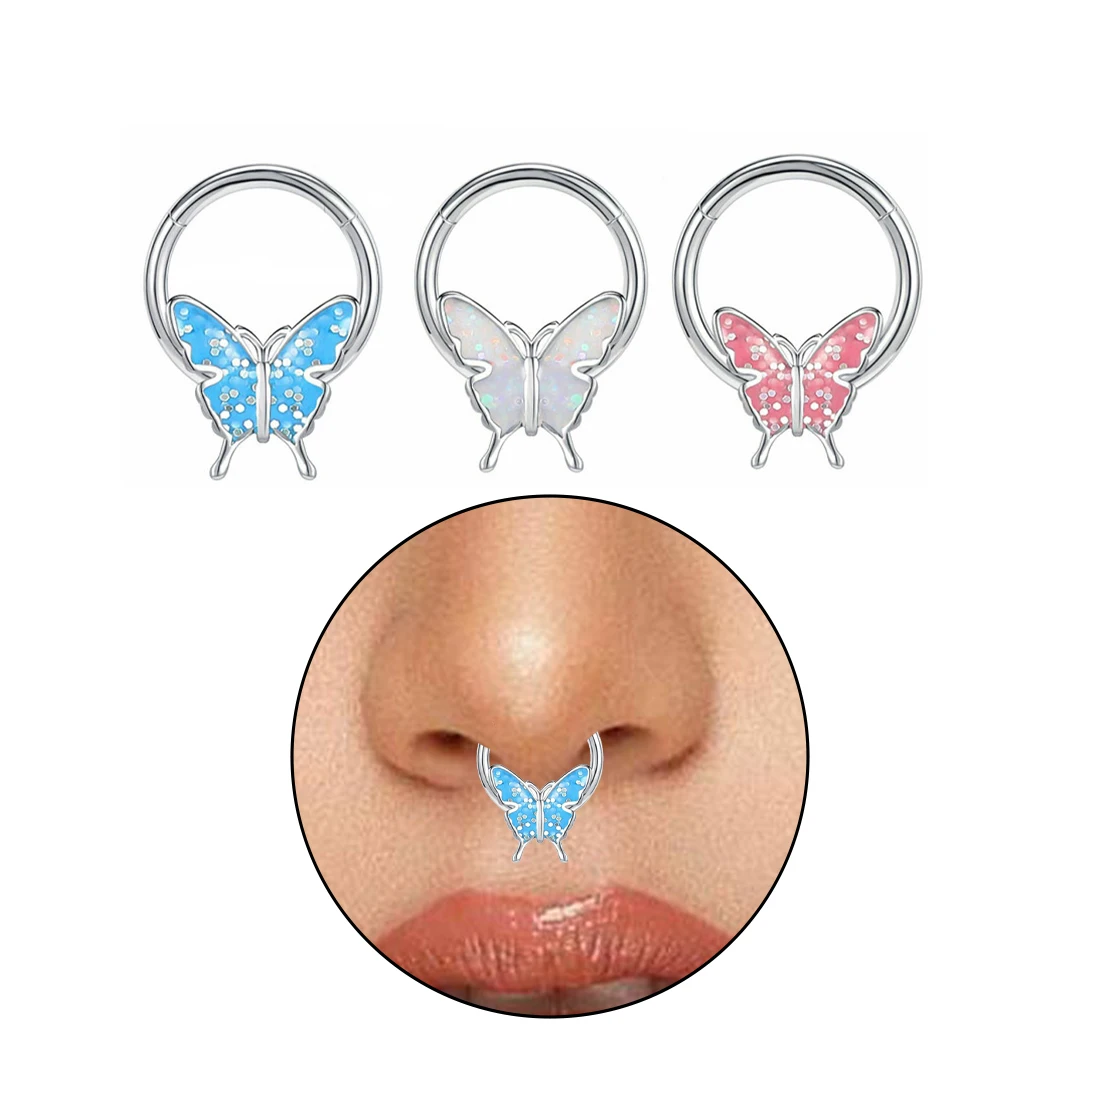 1PC Stainless Steel Butterfly Nose Ring Fashion Nase Septum Piercing Ring Cartilage Hoop Helix Small Earrings